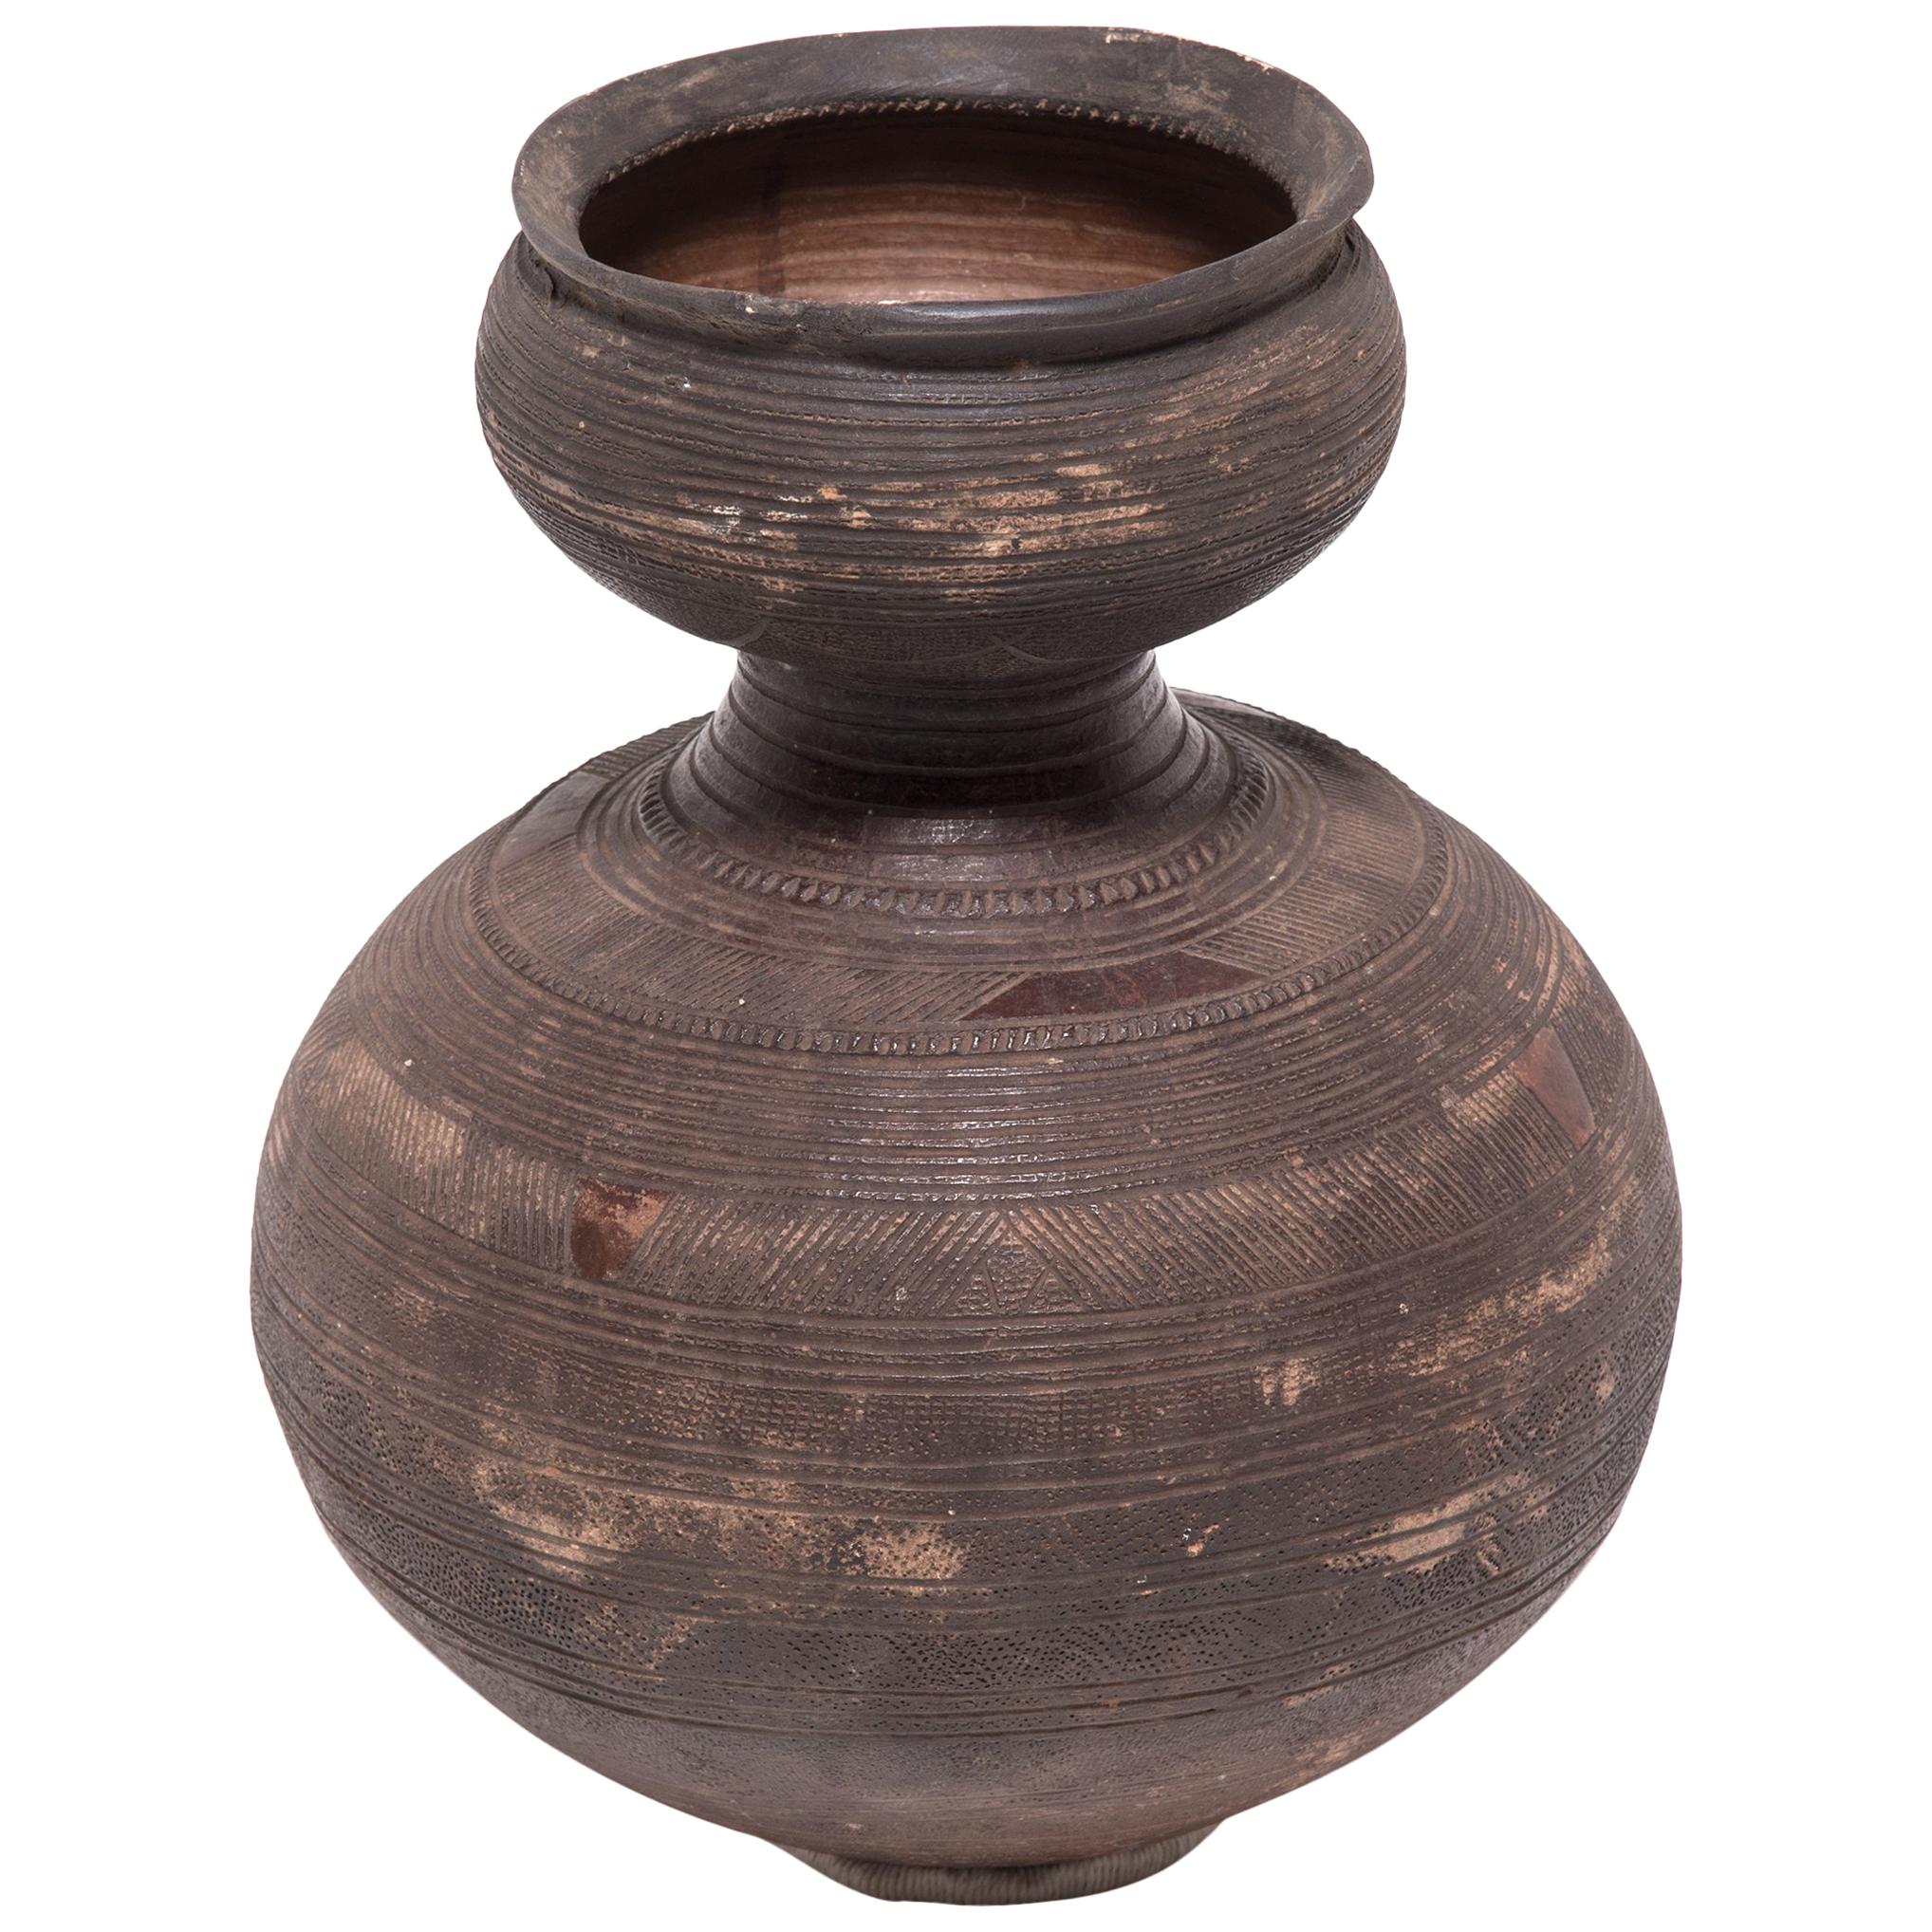 Early 20th Century Nigerian Nupe Gourd Water Vessel